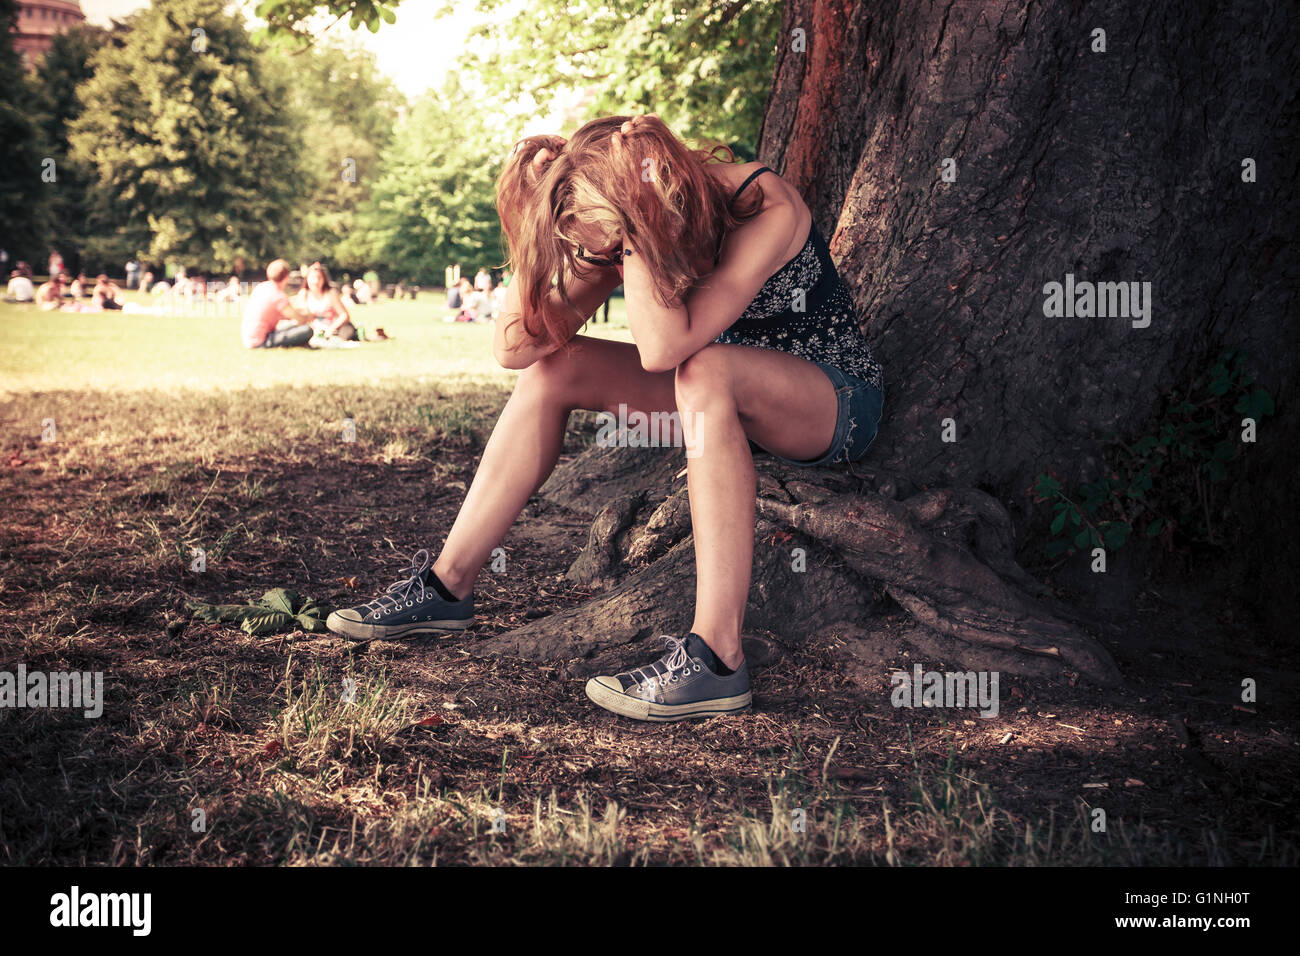 A tired an depressed young woman is sitting under a big tree in the park Stock Photo